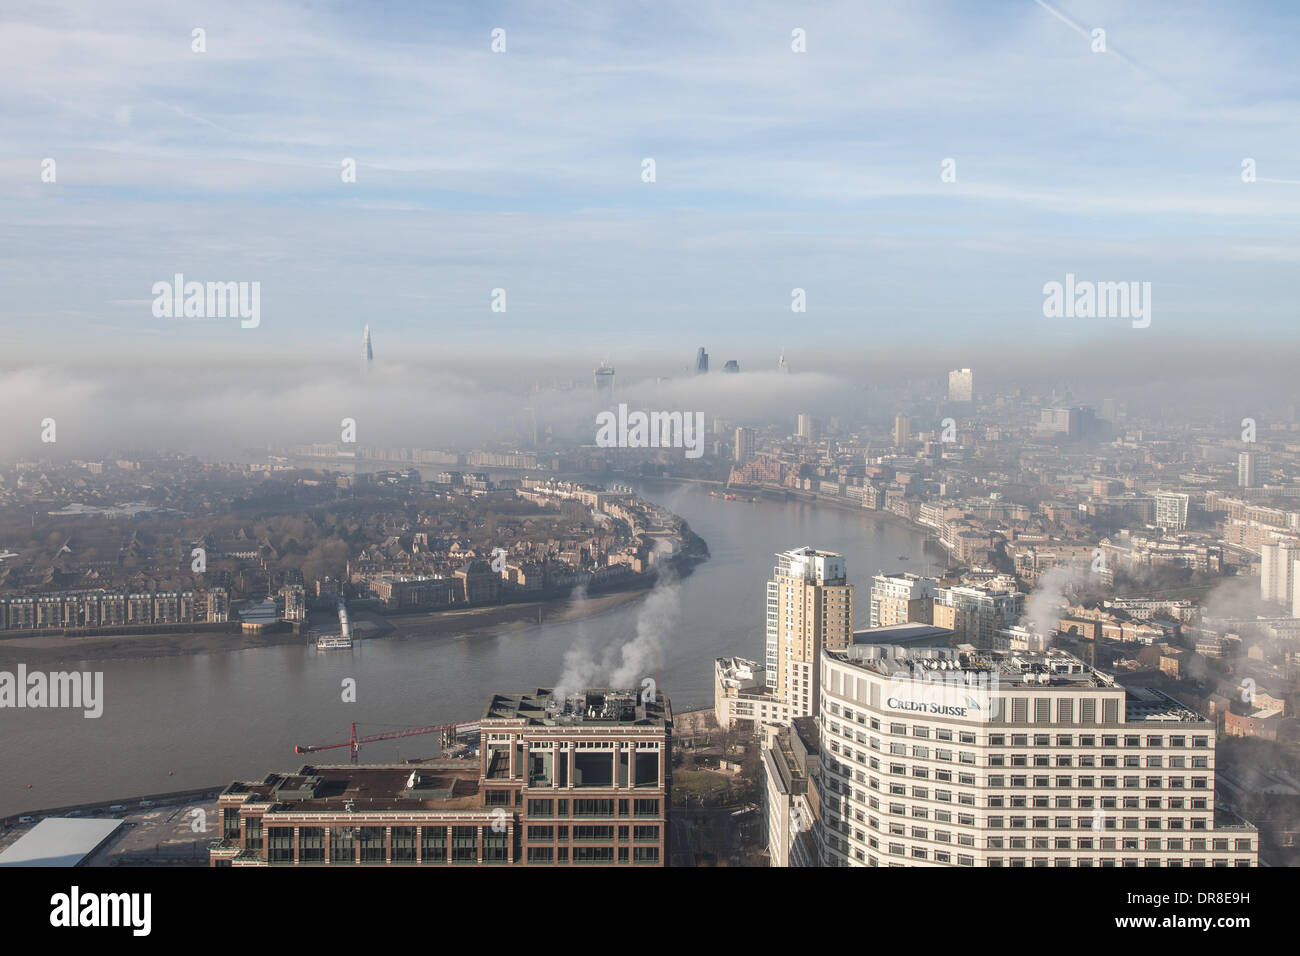 London UK, 21st Jan 2014. A bank of low fog shrouds the City of London and surrounding areas. The tops of London's tallest buildings are visible above the fog. This shot was taken from Canary Wharf. © Steve Bright/Alamy Live News Credit:  Steve Bright/Alamy Live News Stock Photo